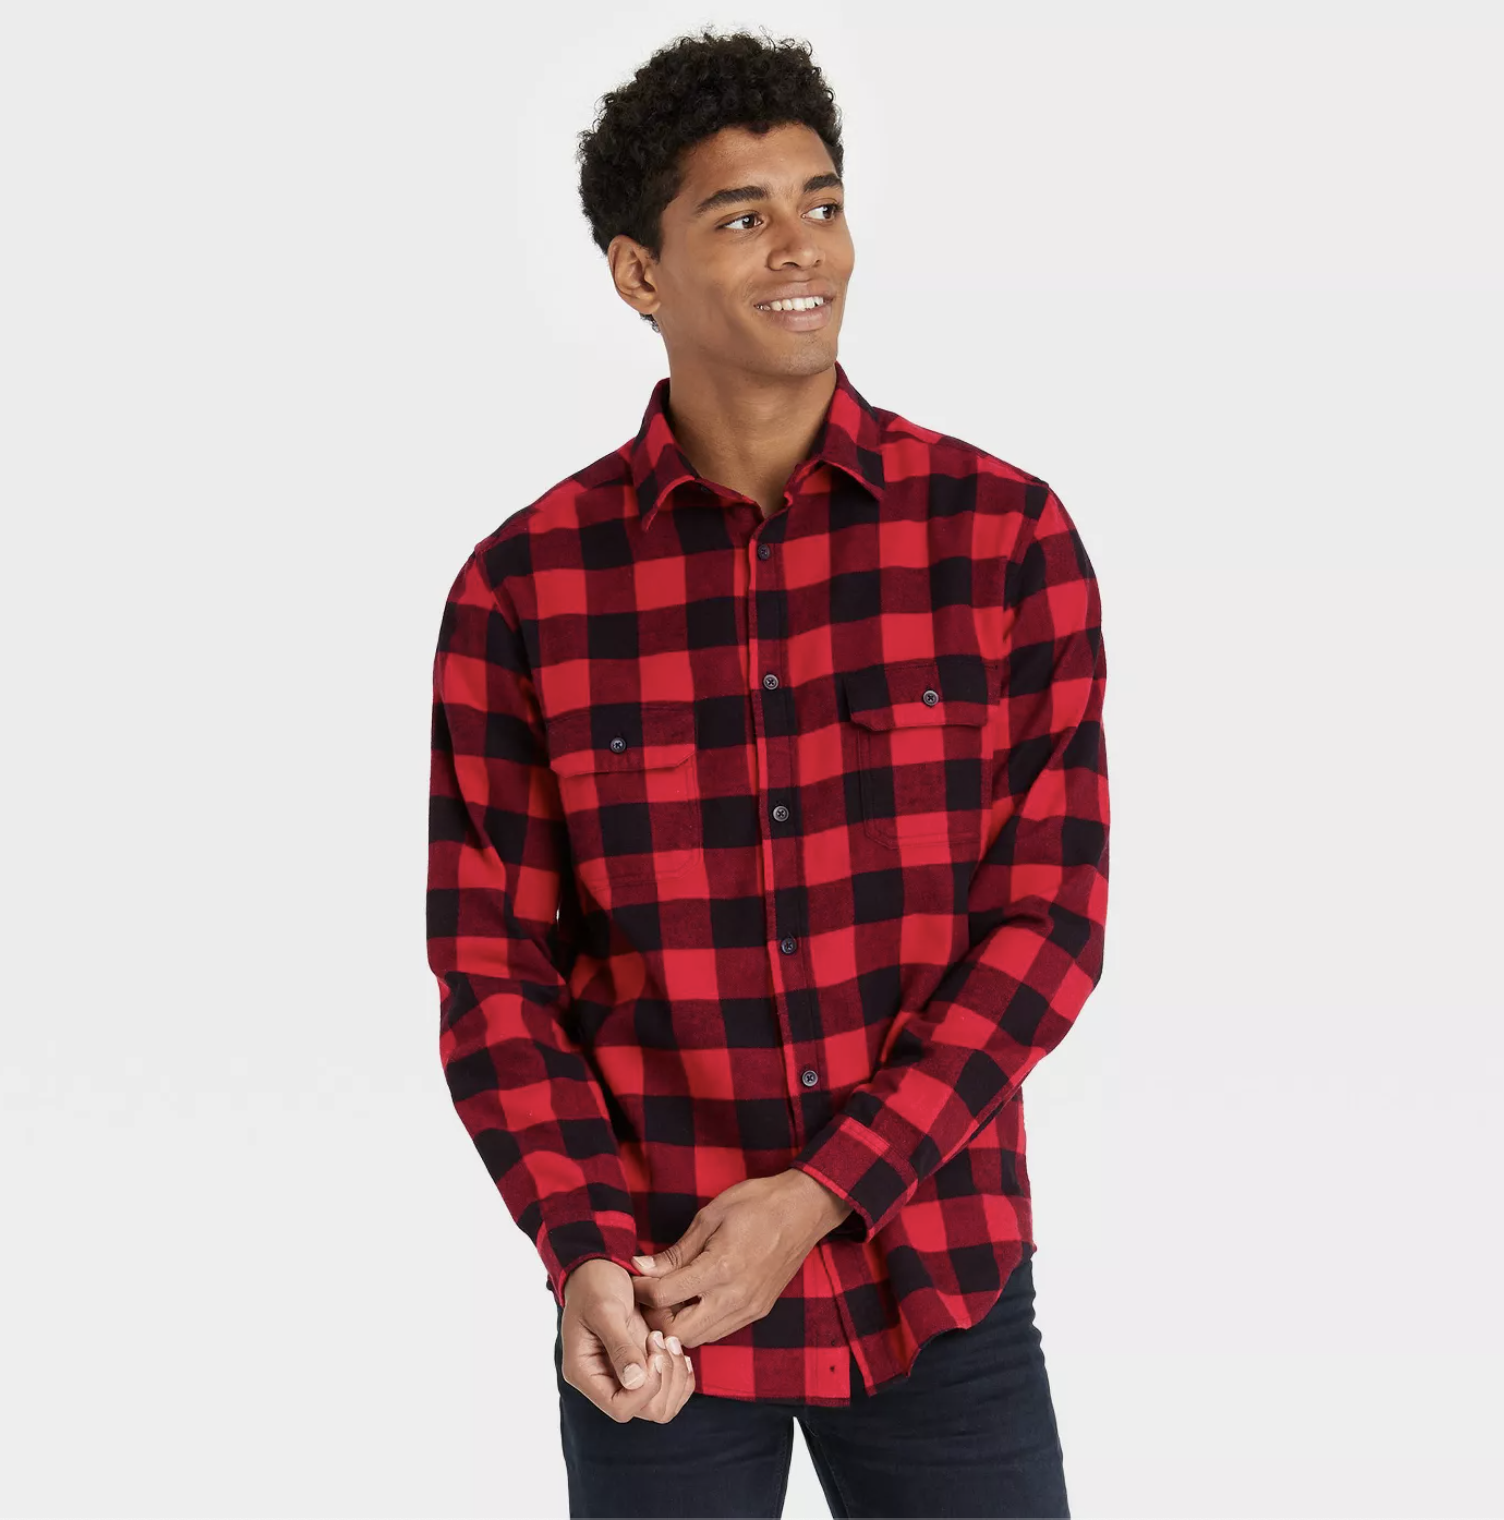 A checkered flannel shirt in red and black